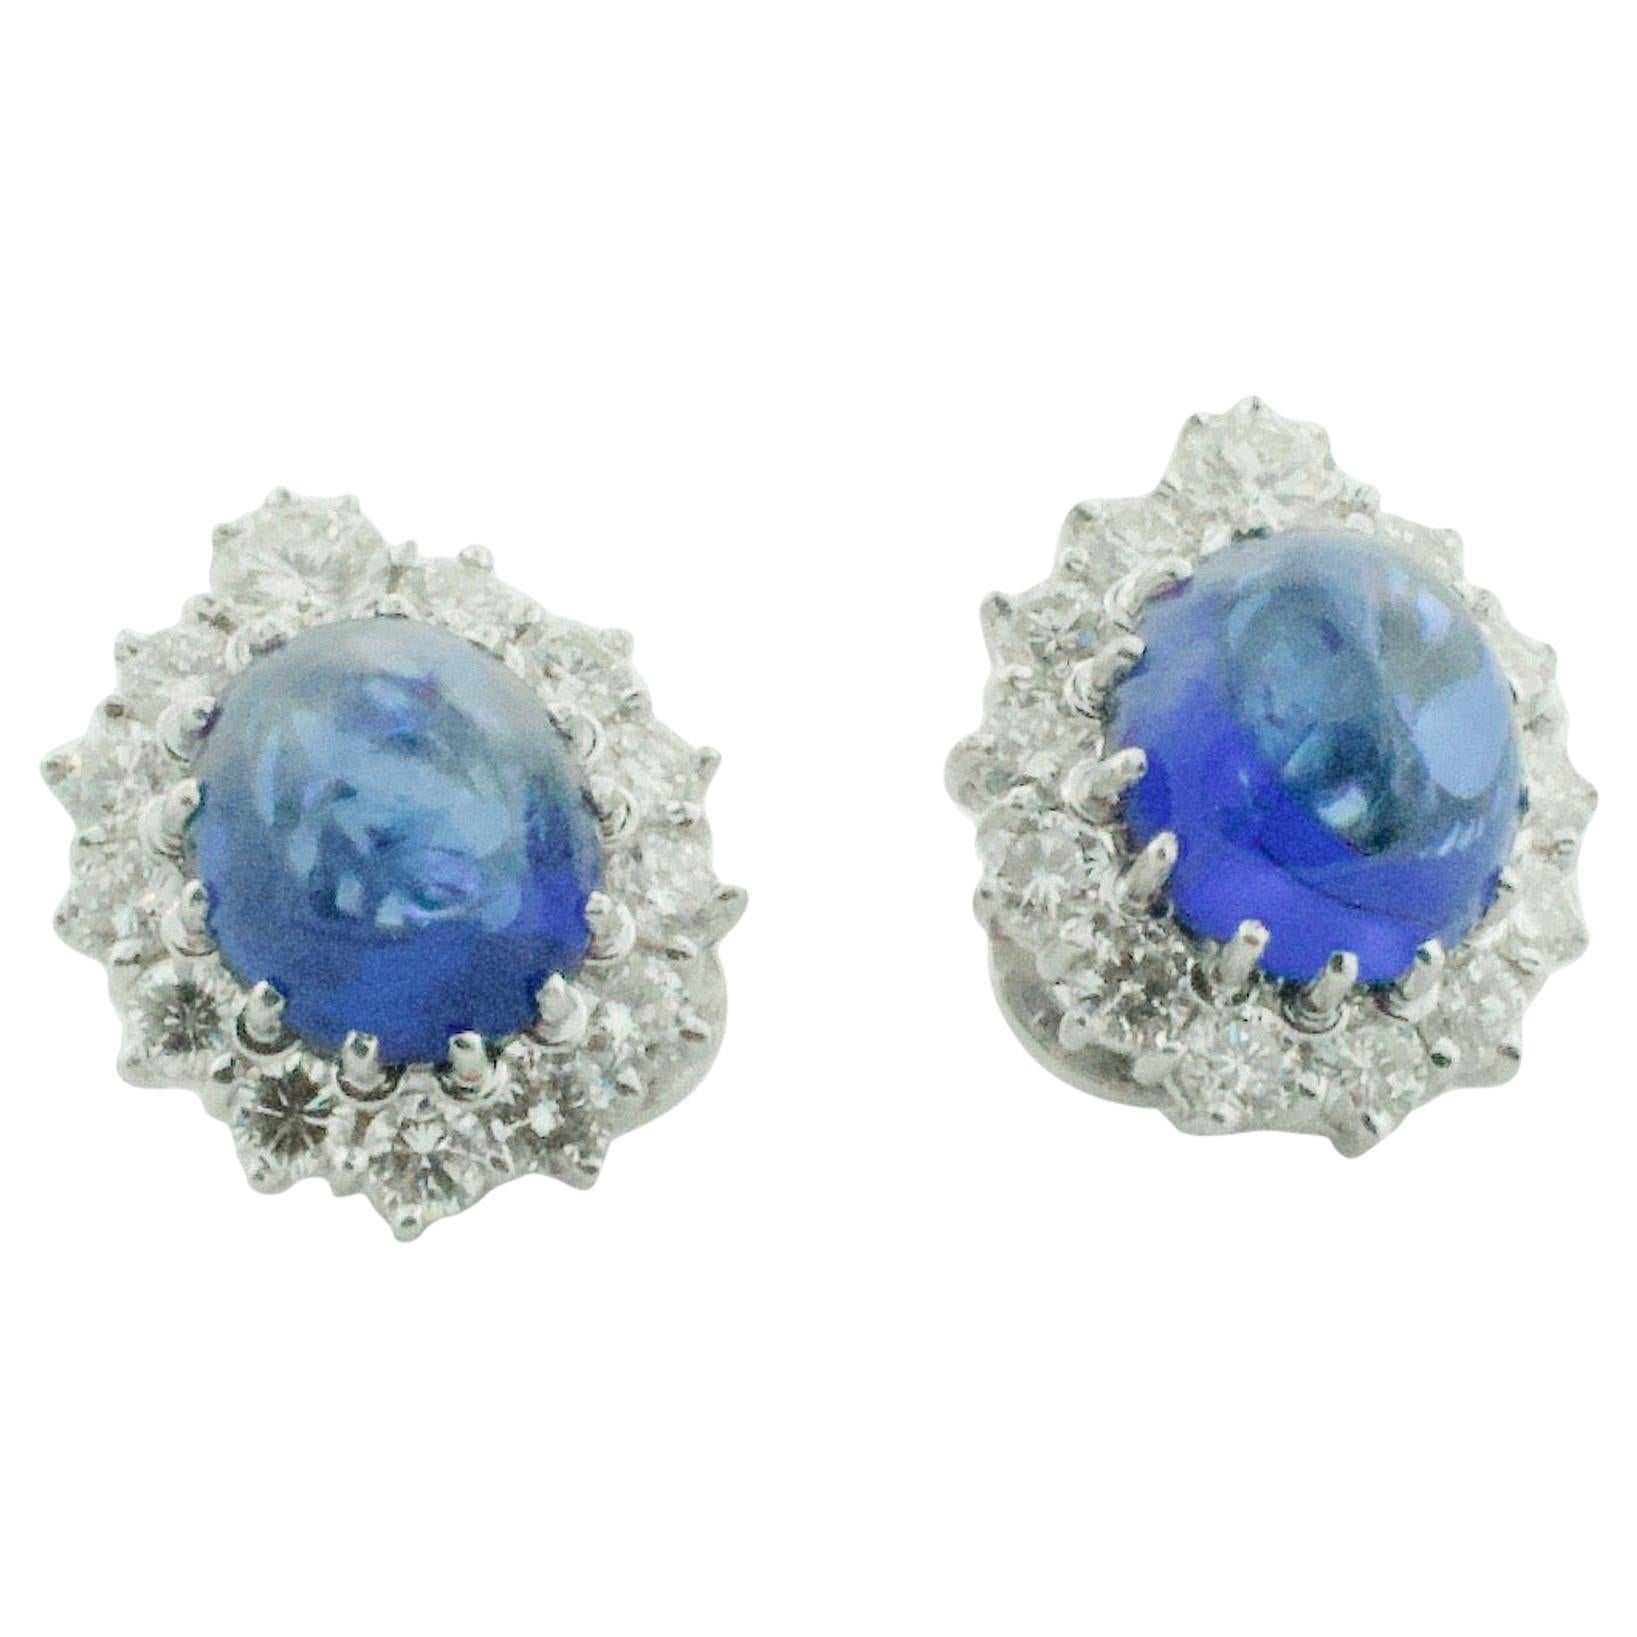 Beautiful Cabochon Sapphire and Diamond Clip Earrings in Platinum